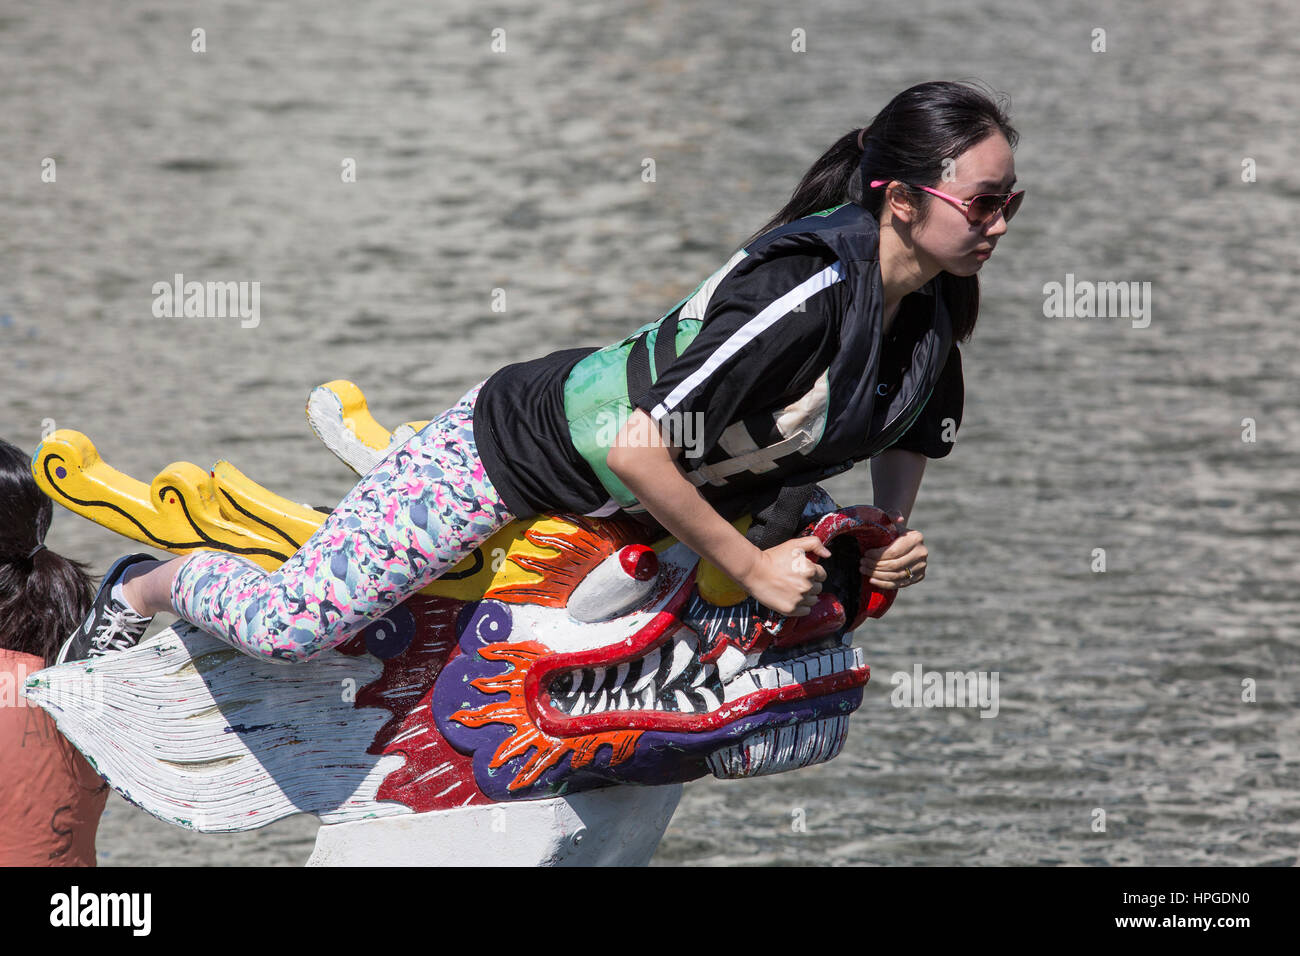 Woman preparing to grab a flag to signal winning a dragon boat race Stock Photo